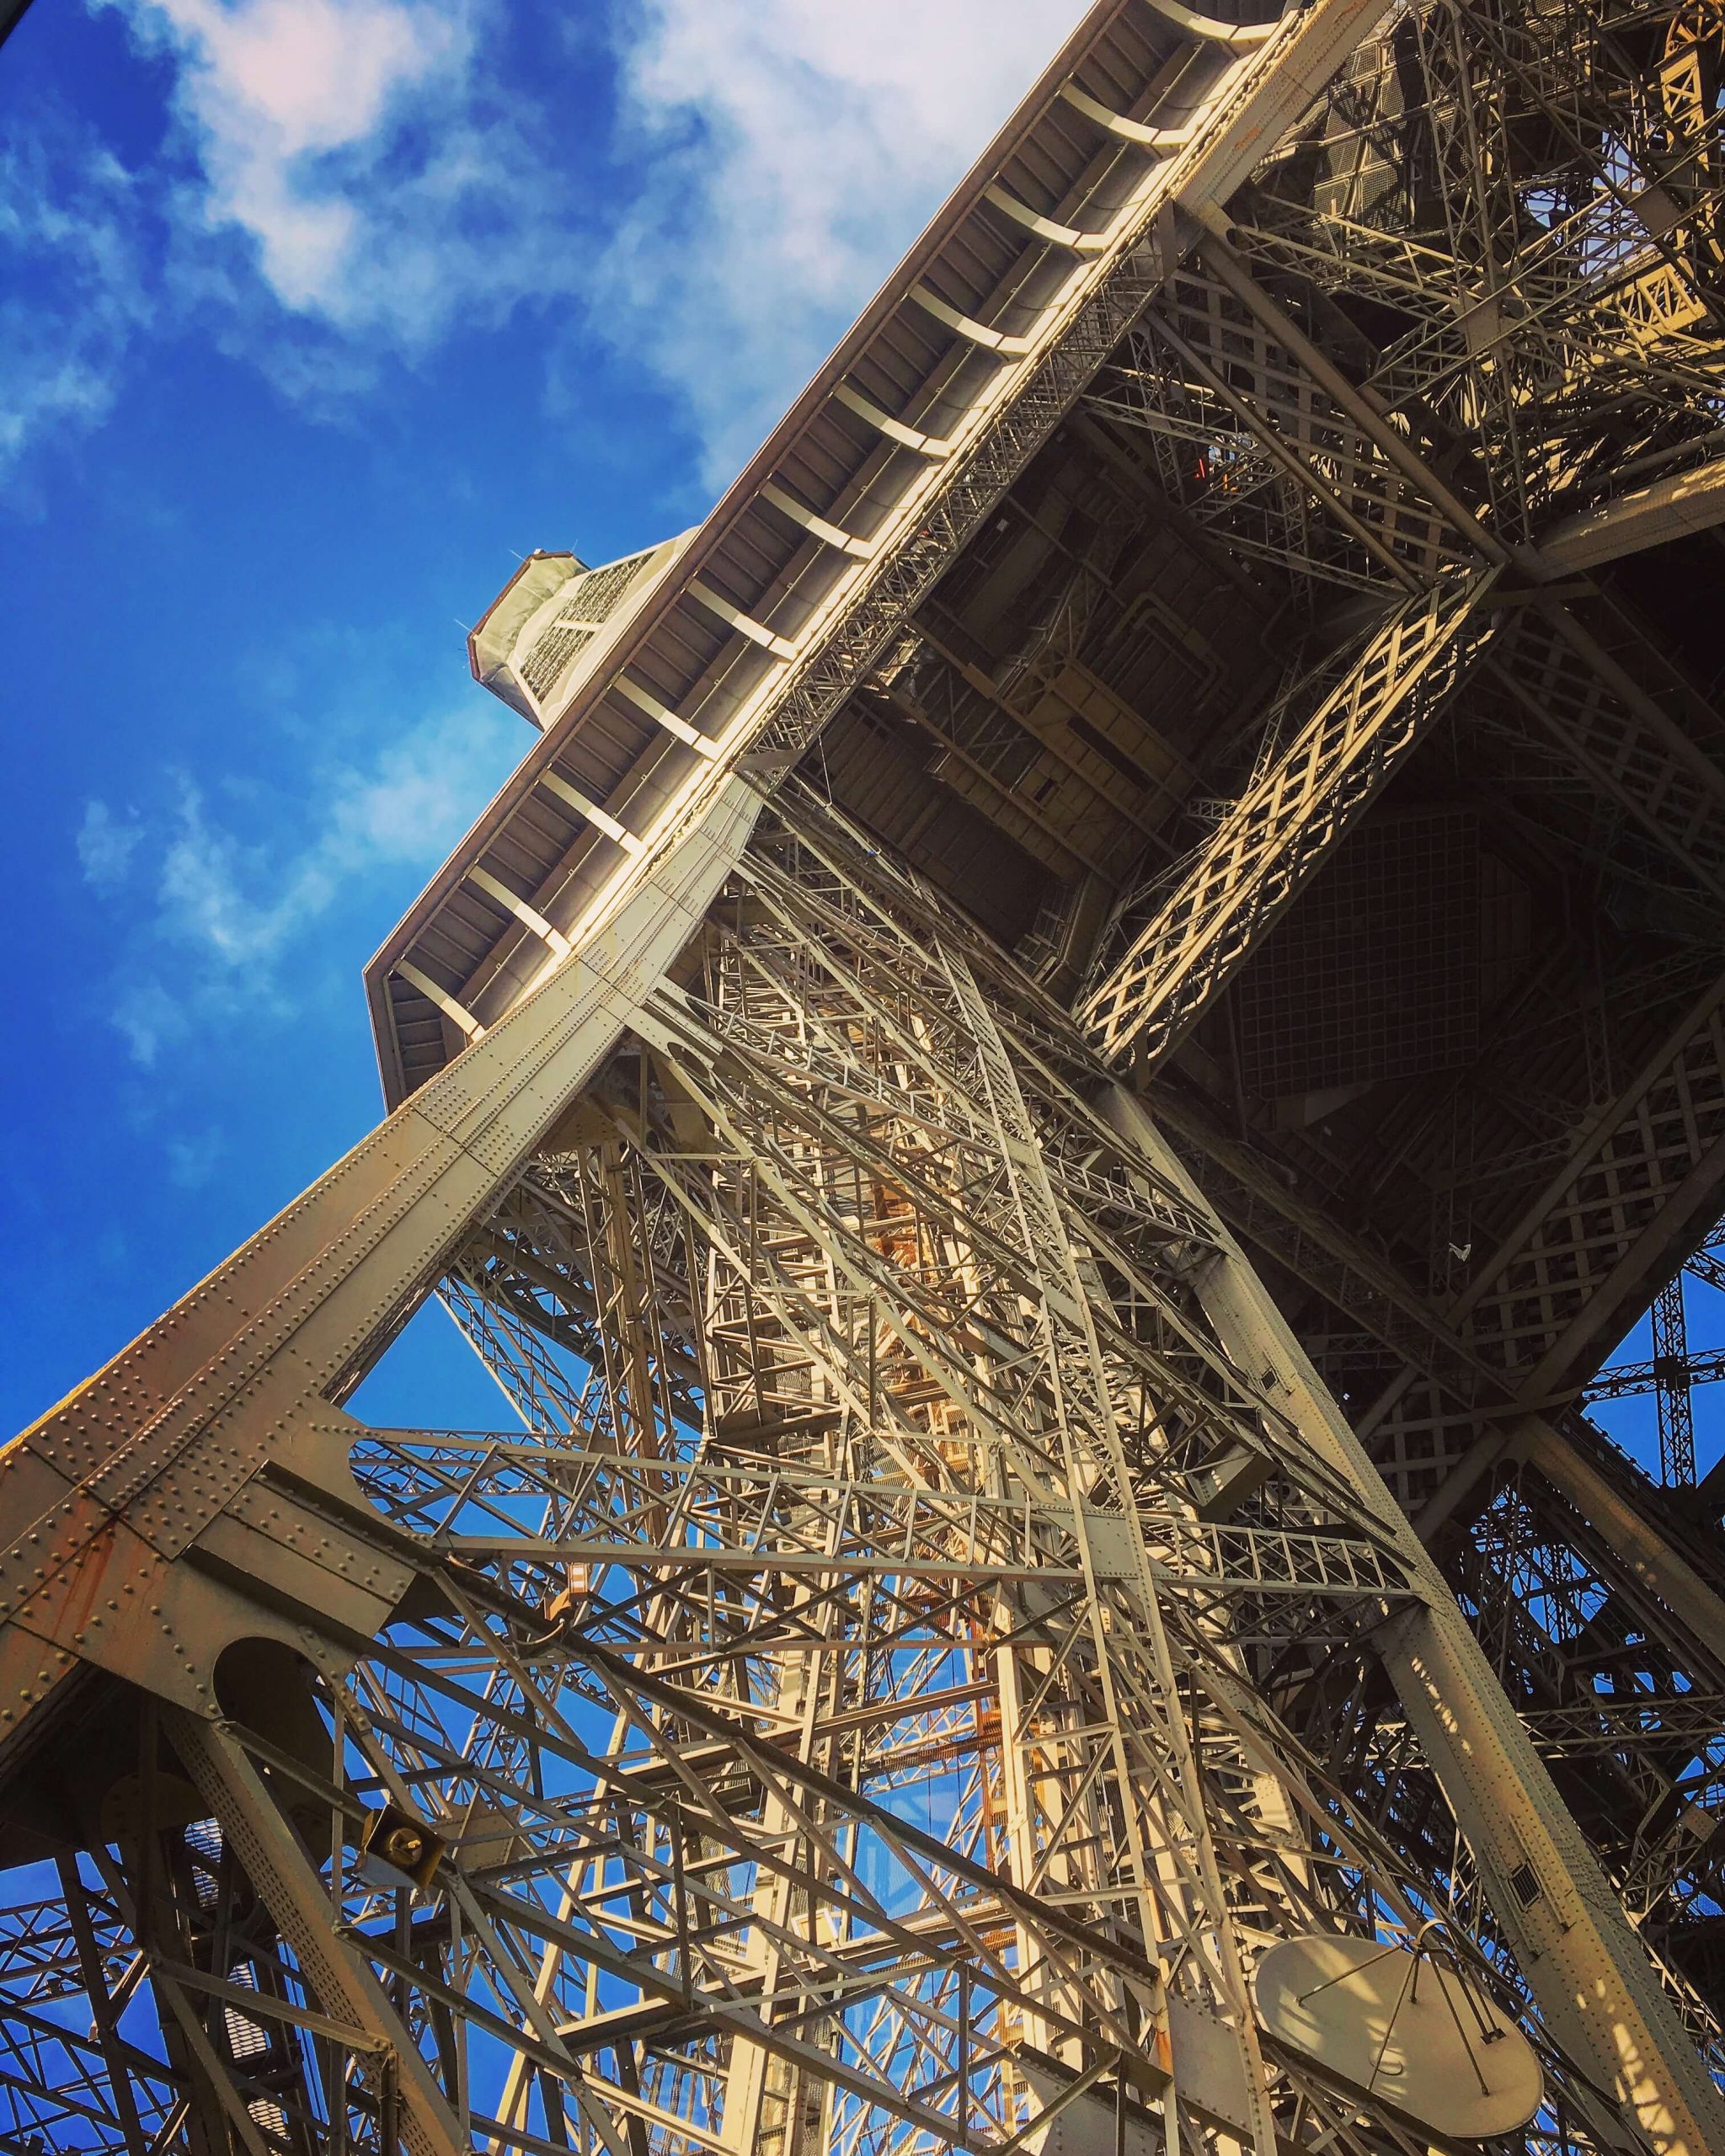 Looking up to the top of the Eiffel Tower with bright blue sky